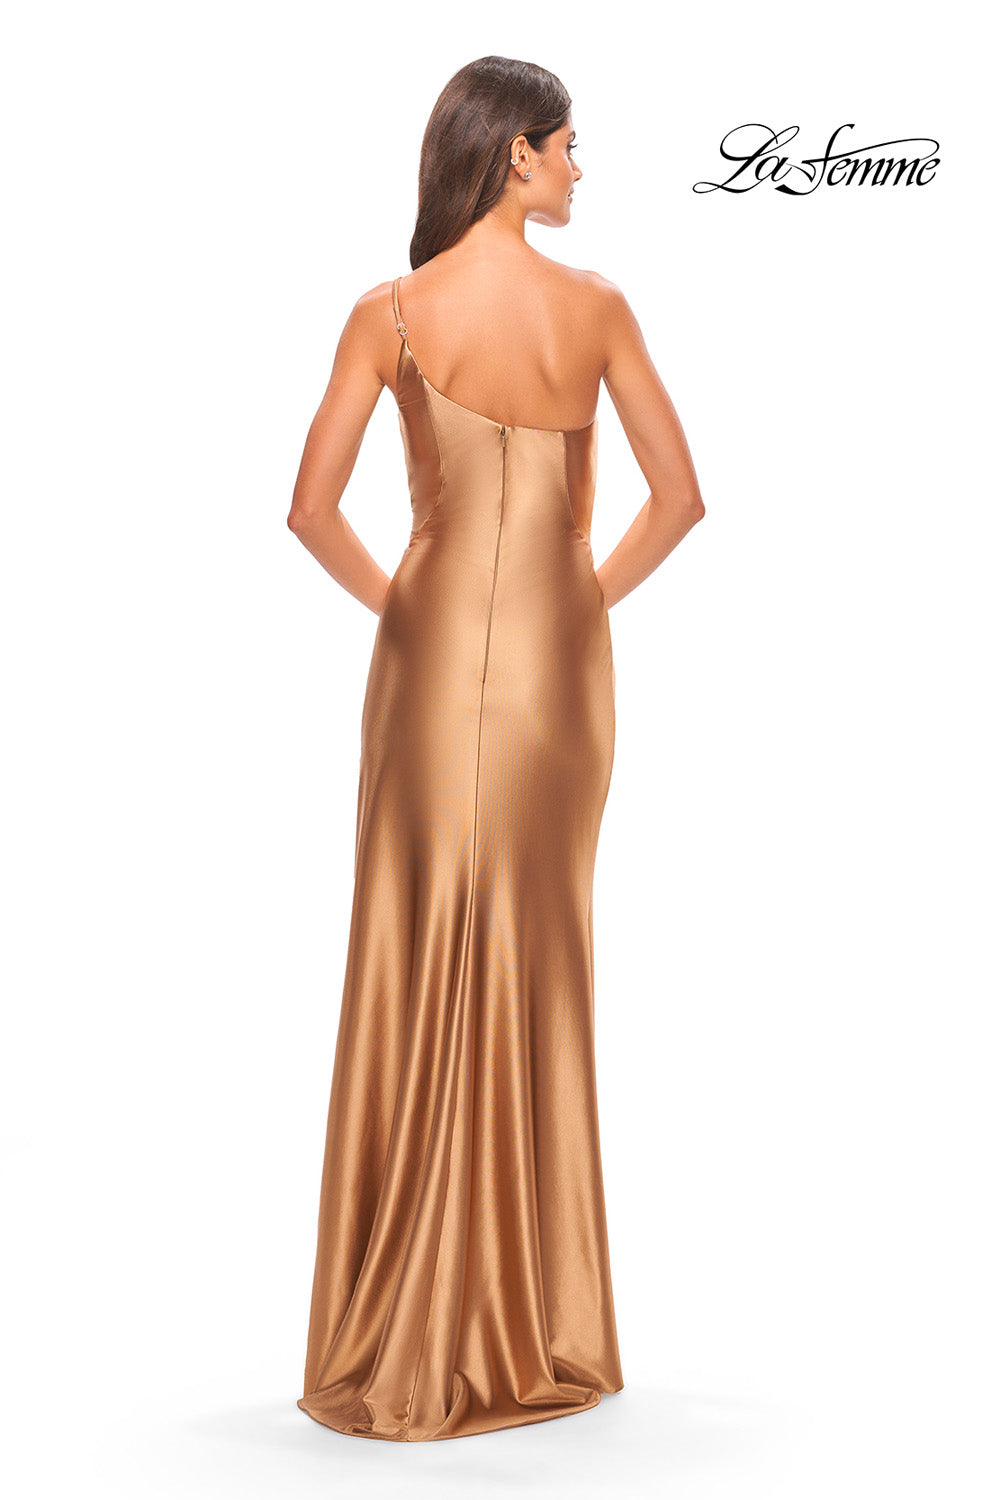 La Femme 31391 prom dress images.  La Femme 31391 is available in these colors: Black, Blush, Bronze, Dark Emerald, Red, Royal Blue, Royal Purple, Silver.